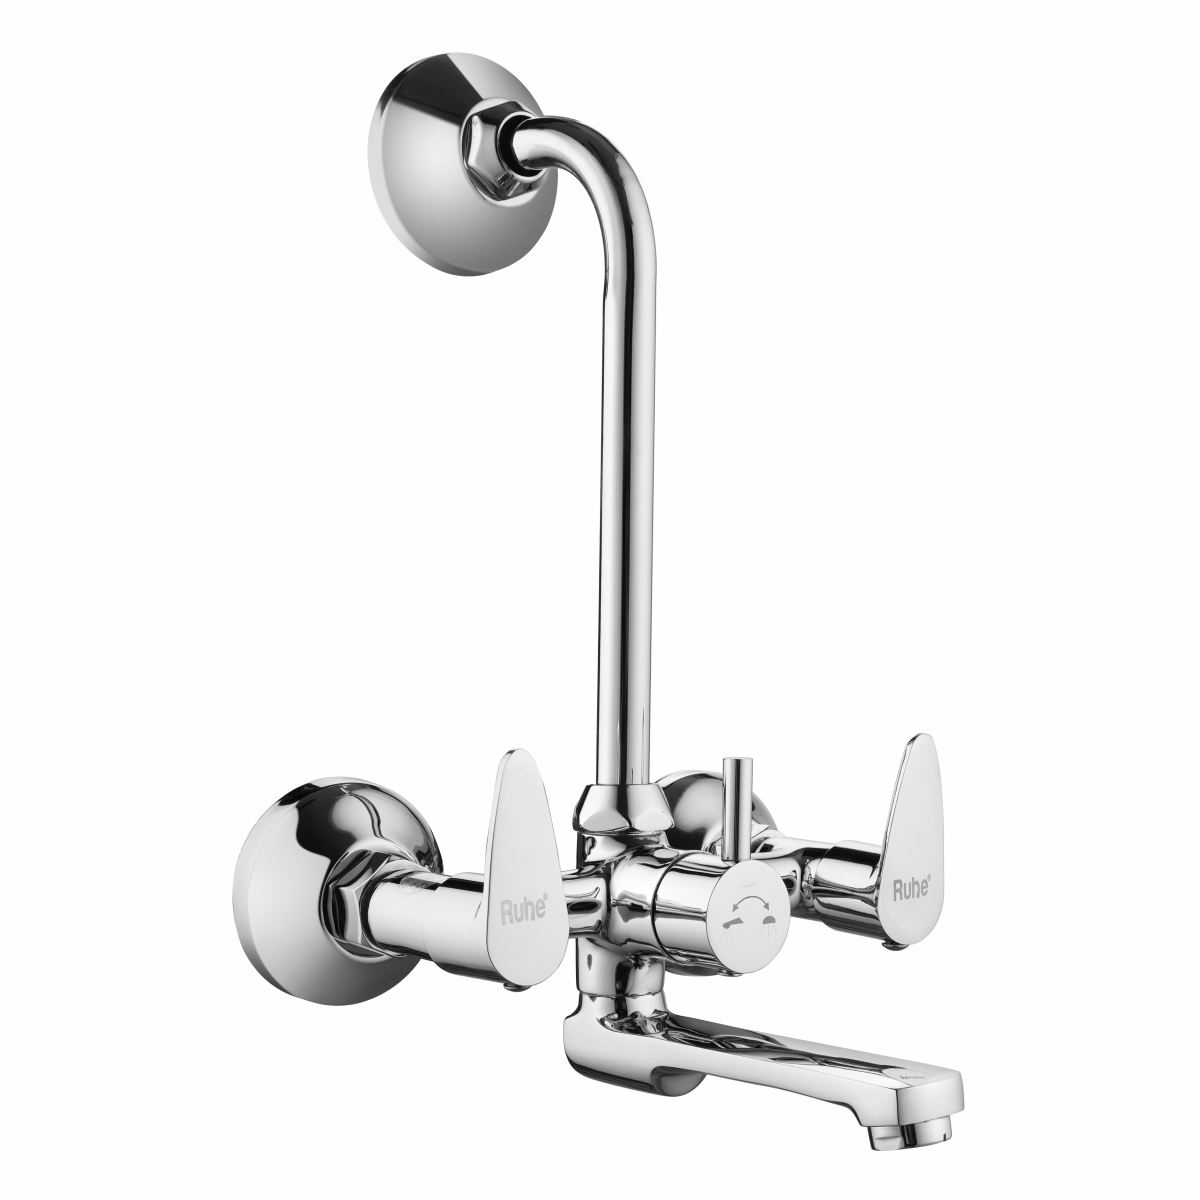 Liva Wall Mixer Brass Faucet with L Bend